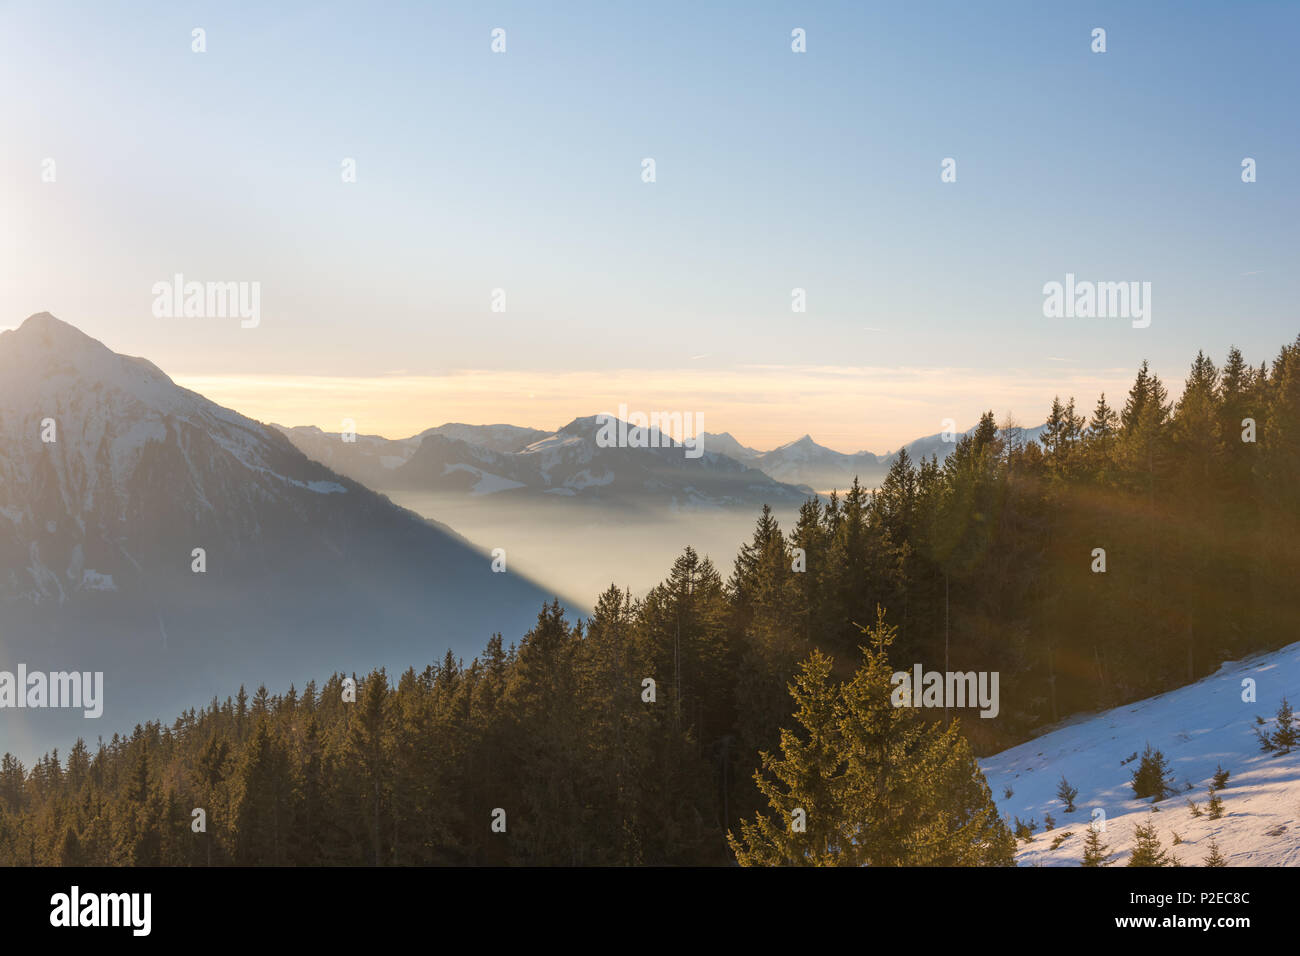 The sun shines over the pine trees in the Swiss Alps. Stock Photo